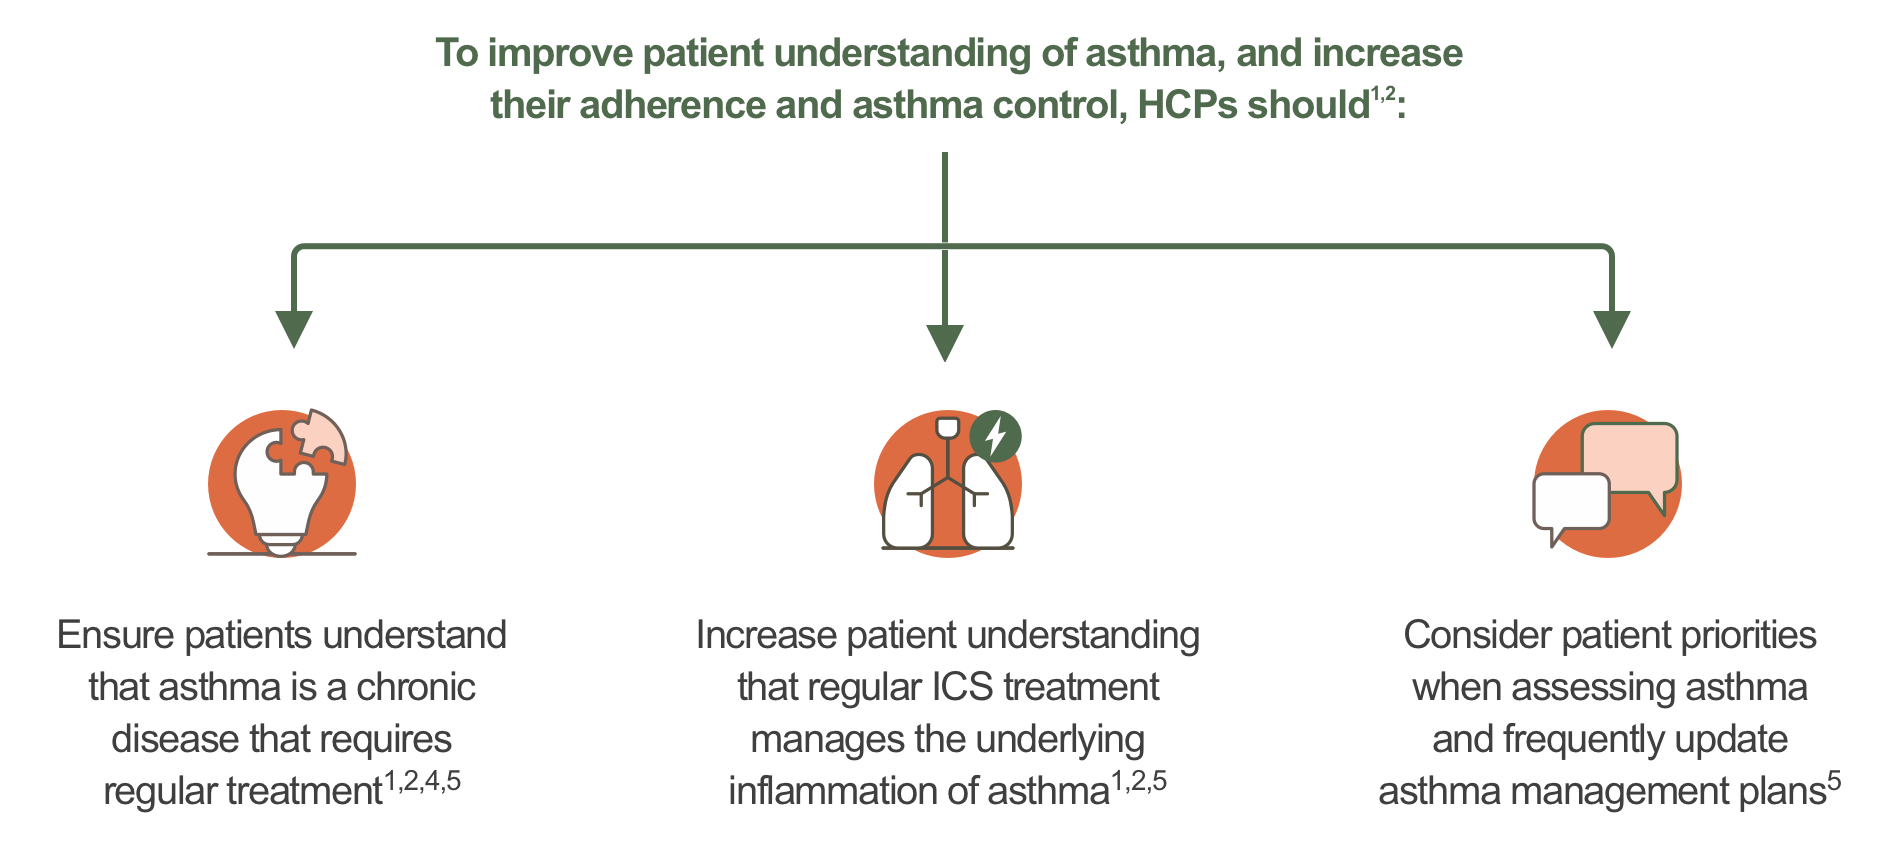 to improve patient understanding of asthma, increase adherence and asthma control, HCPs should